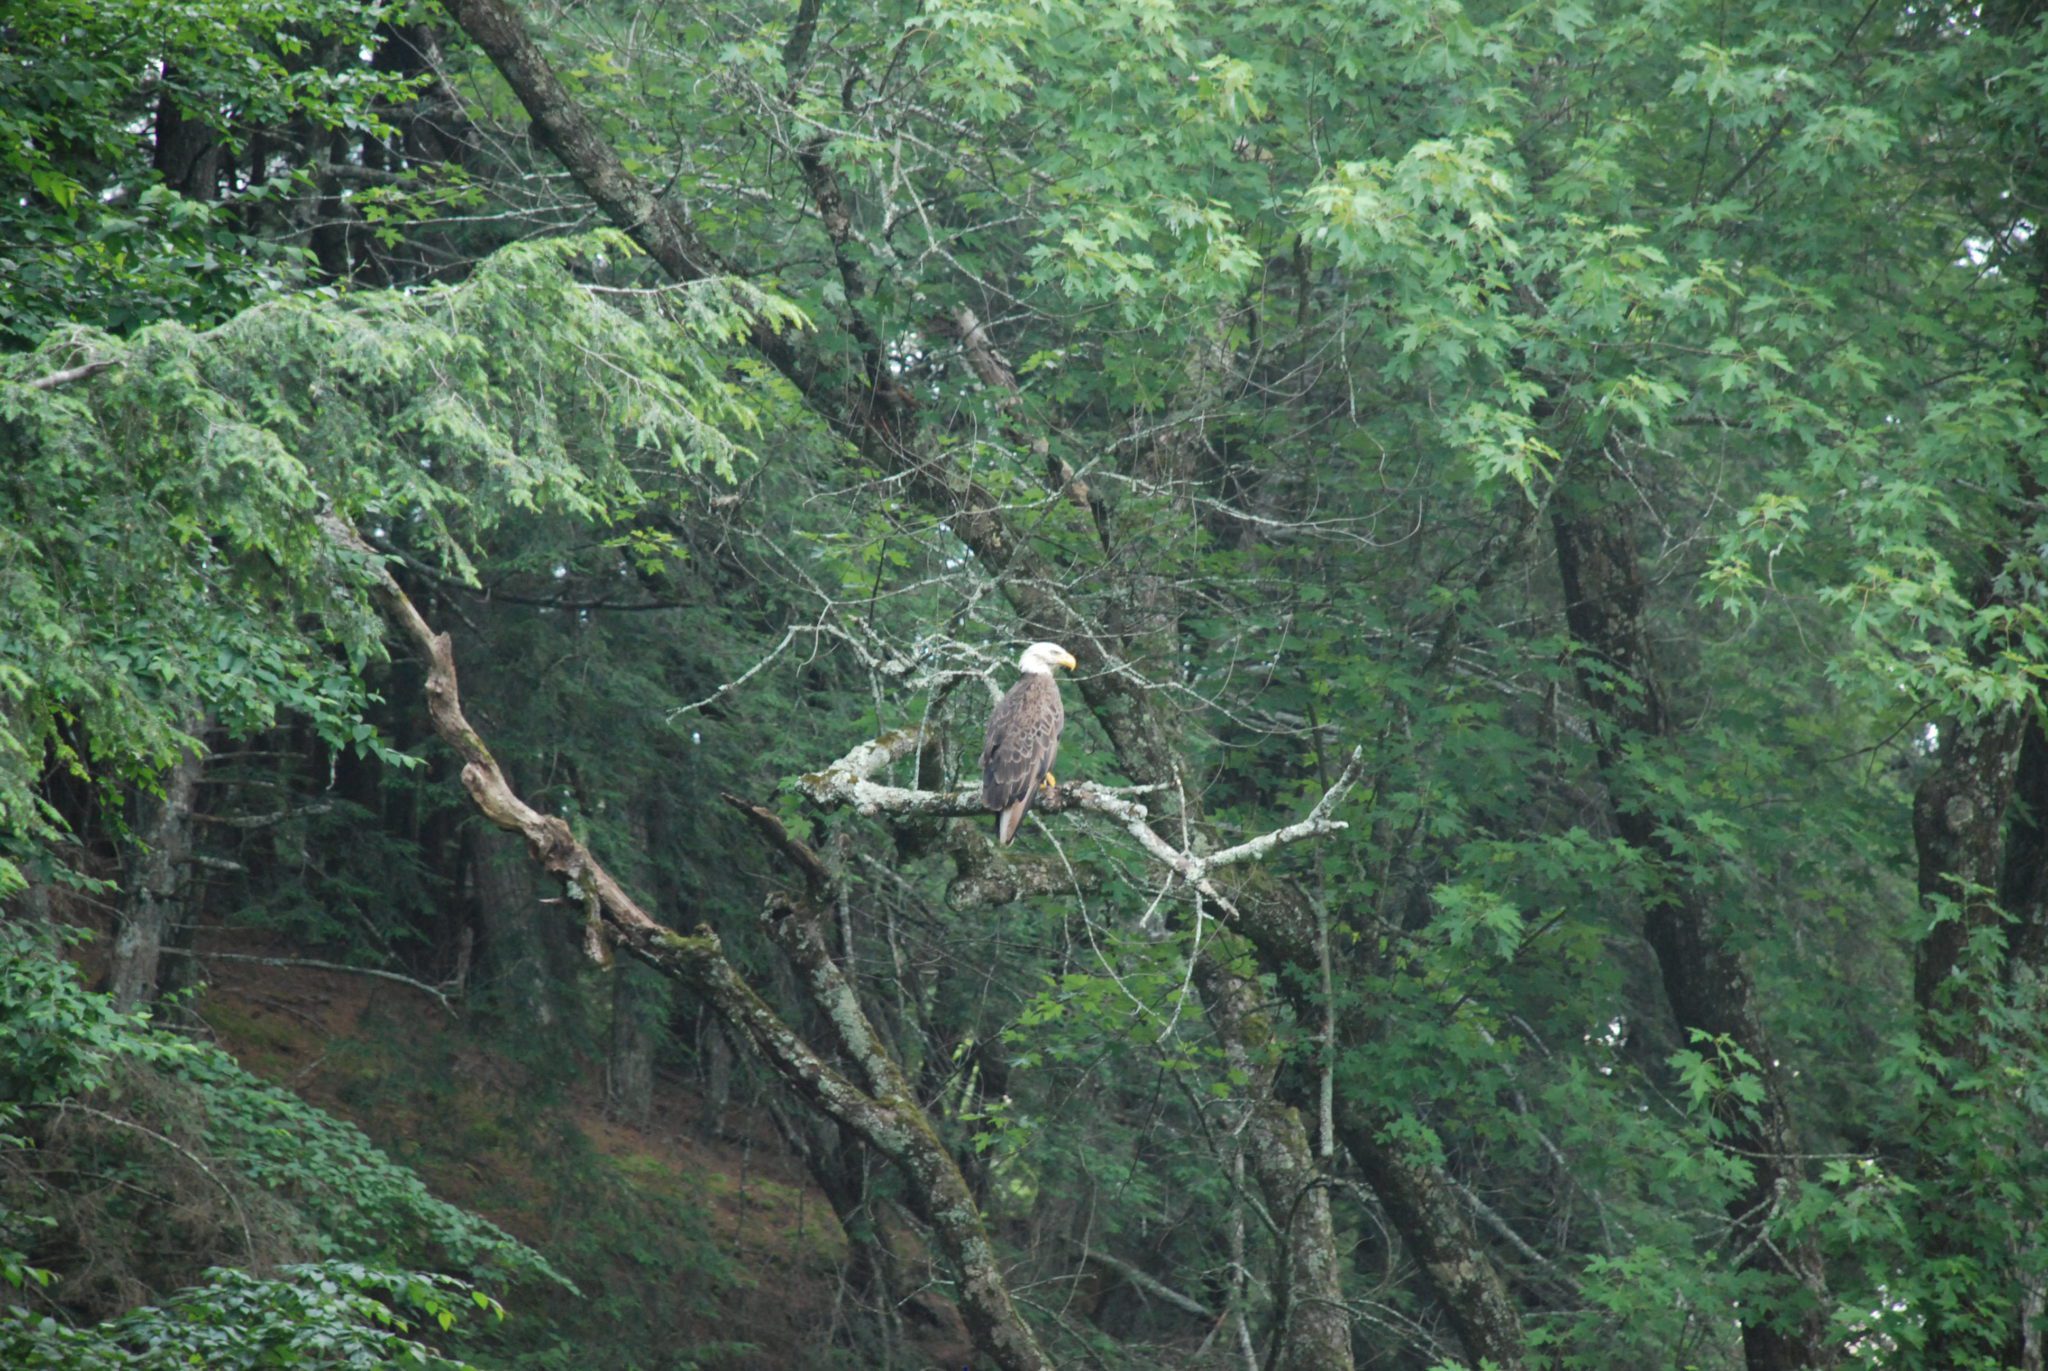 Maybe you can glimpse of a bald eagle on your visit